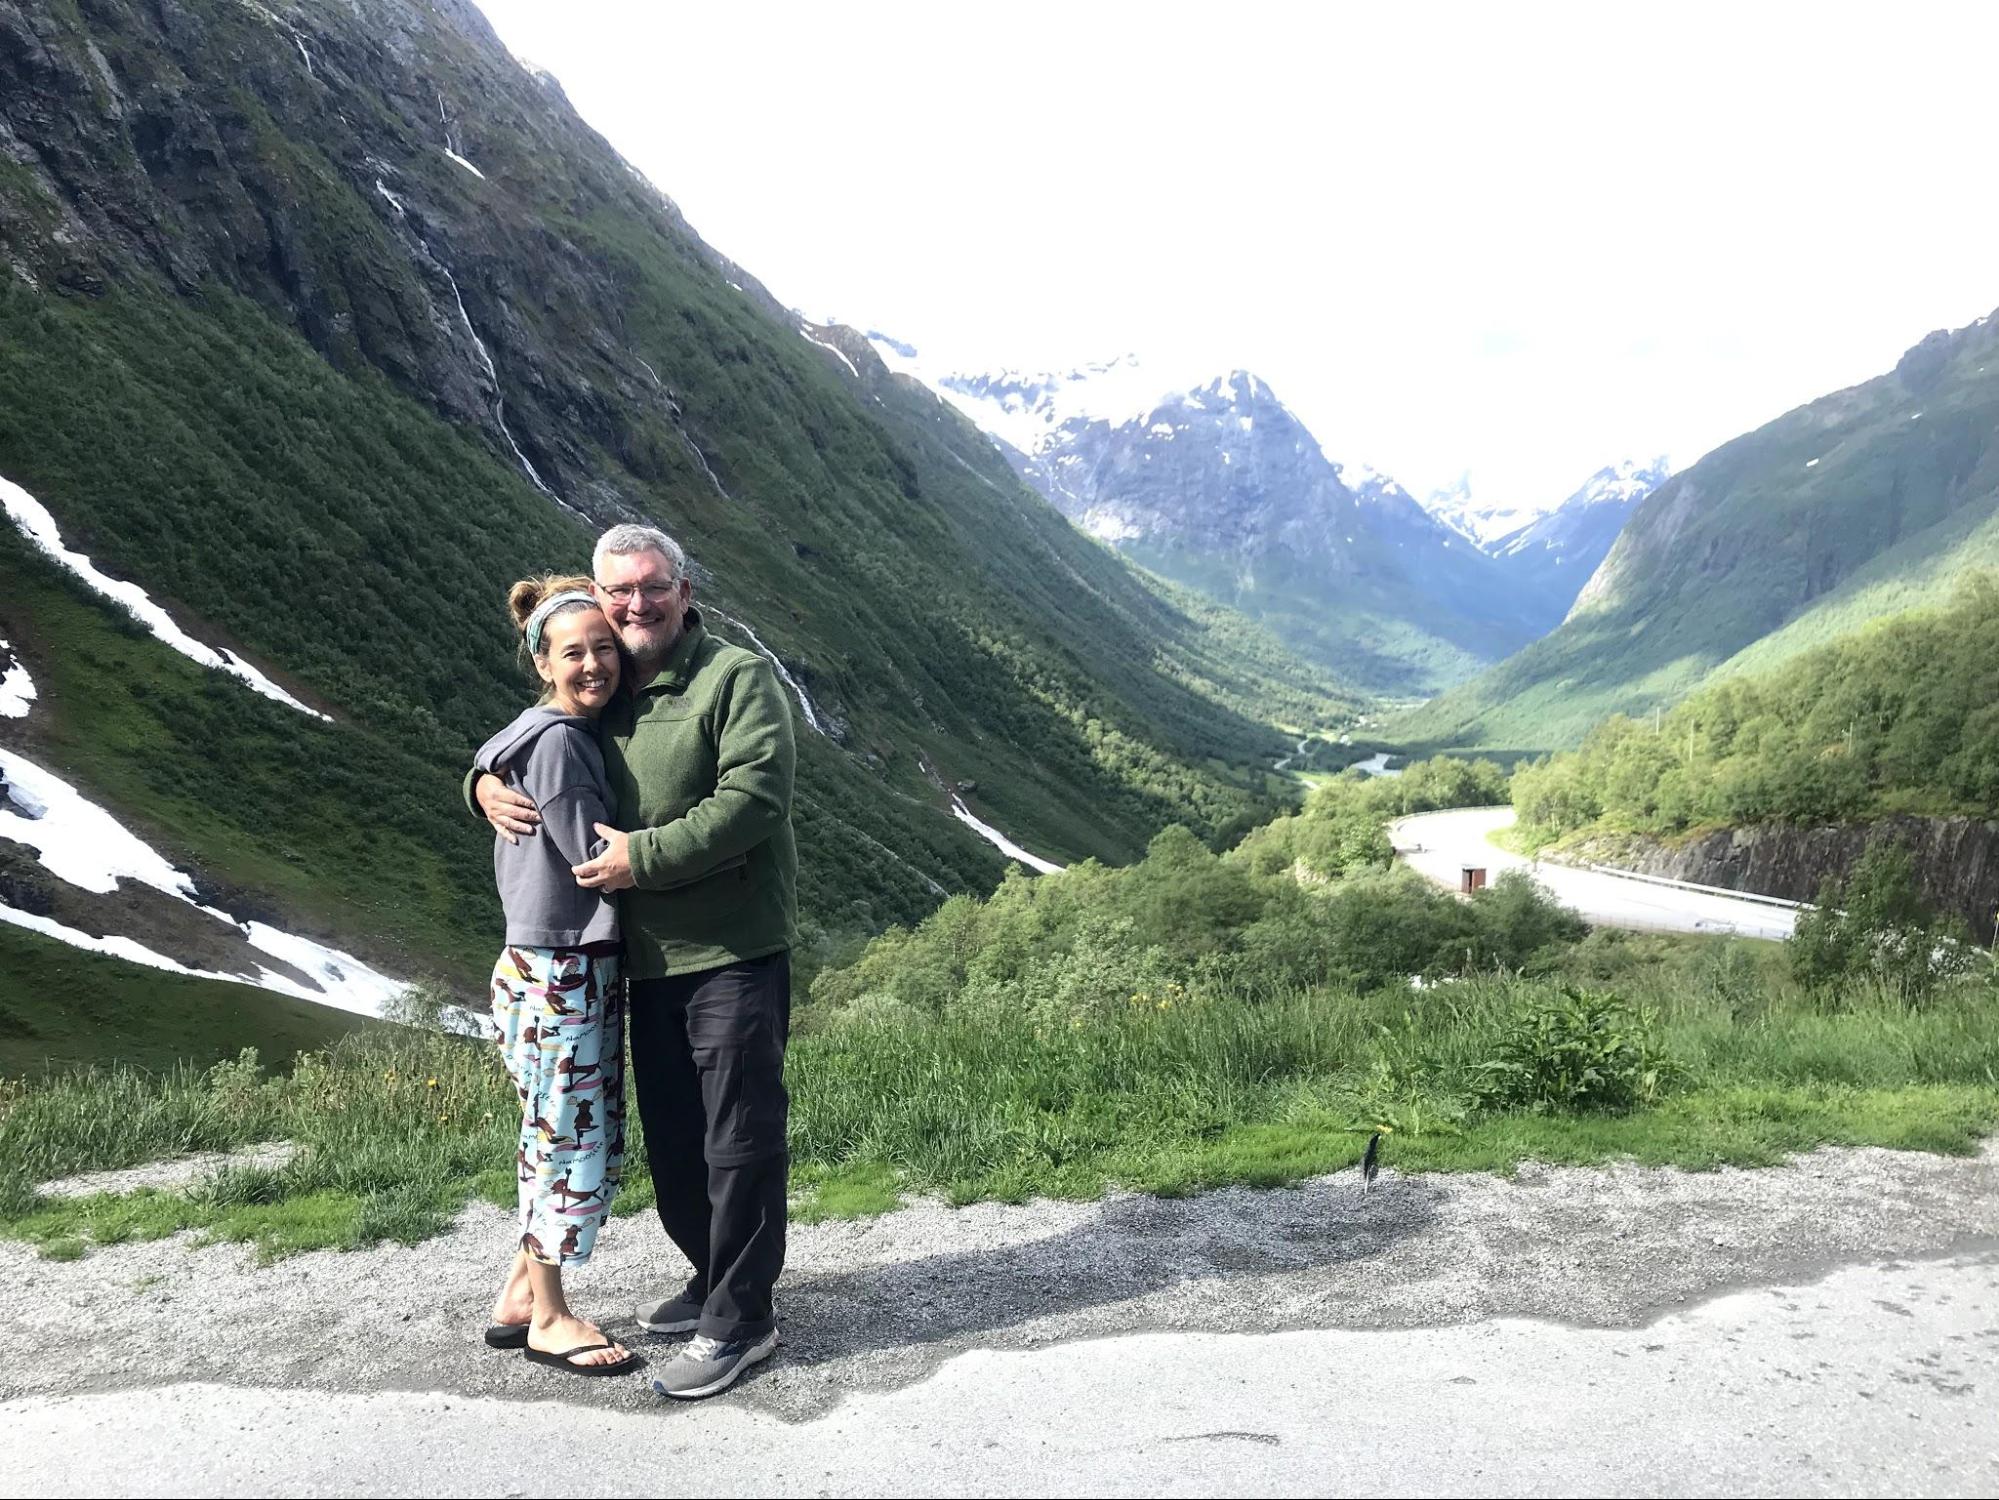 We learned about Briksdalsbreen